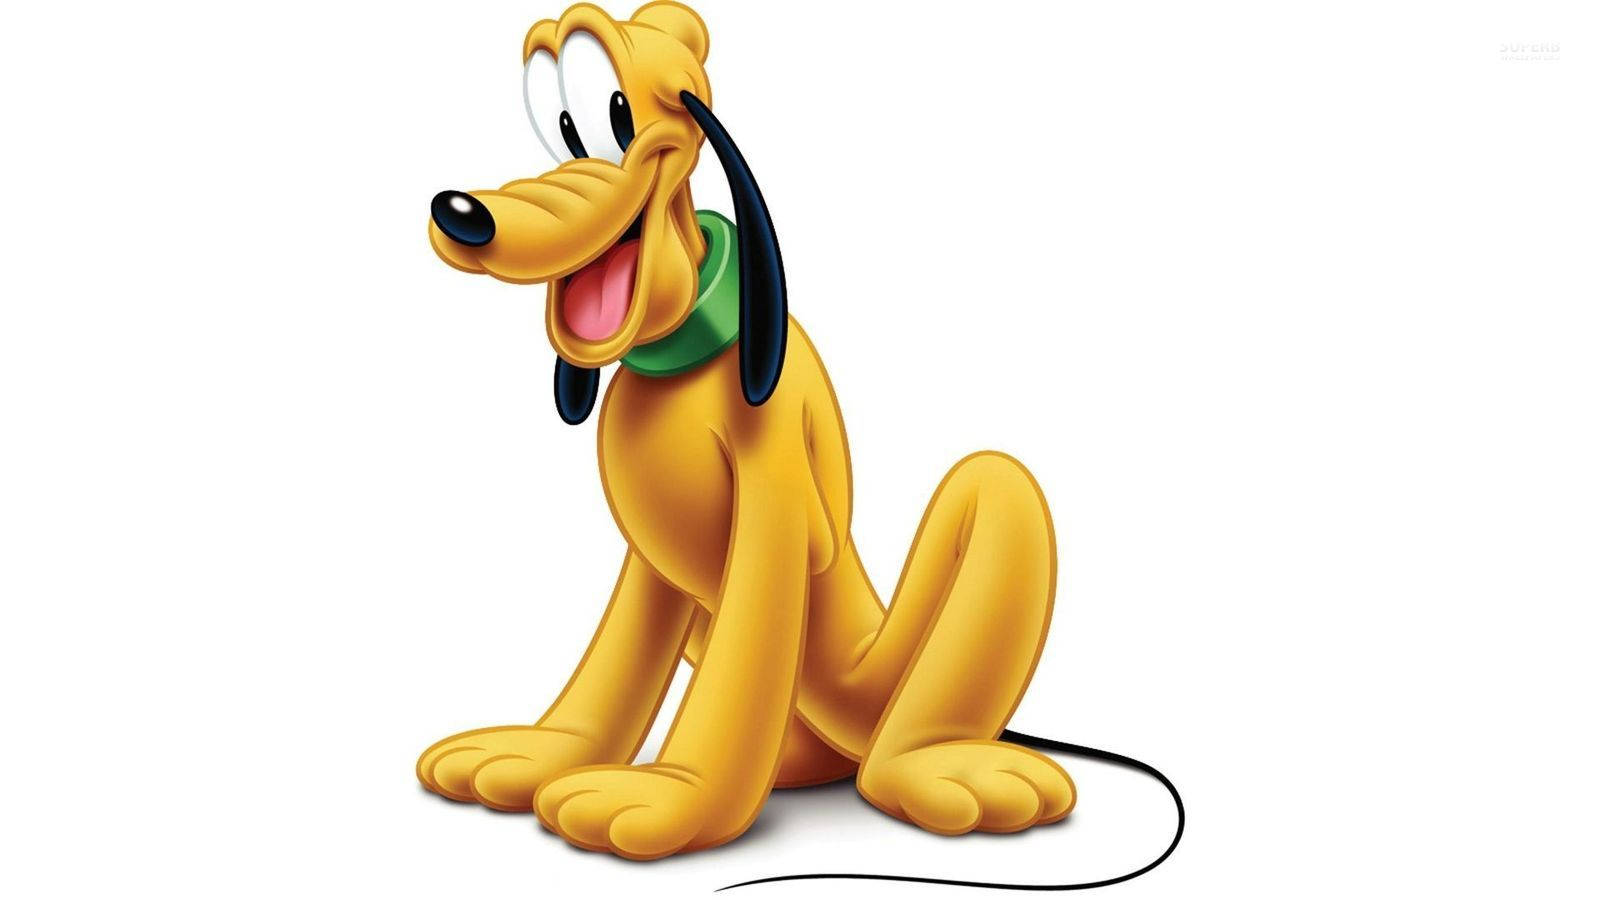 Disney's Cheerful Pluto Playing Fetch In The Green Park